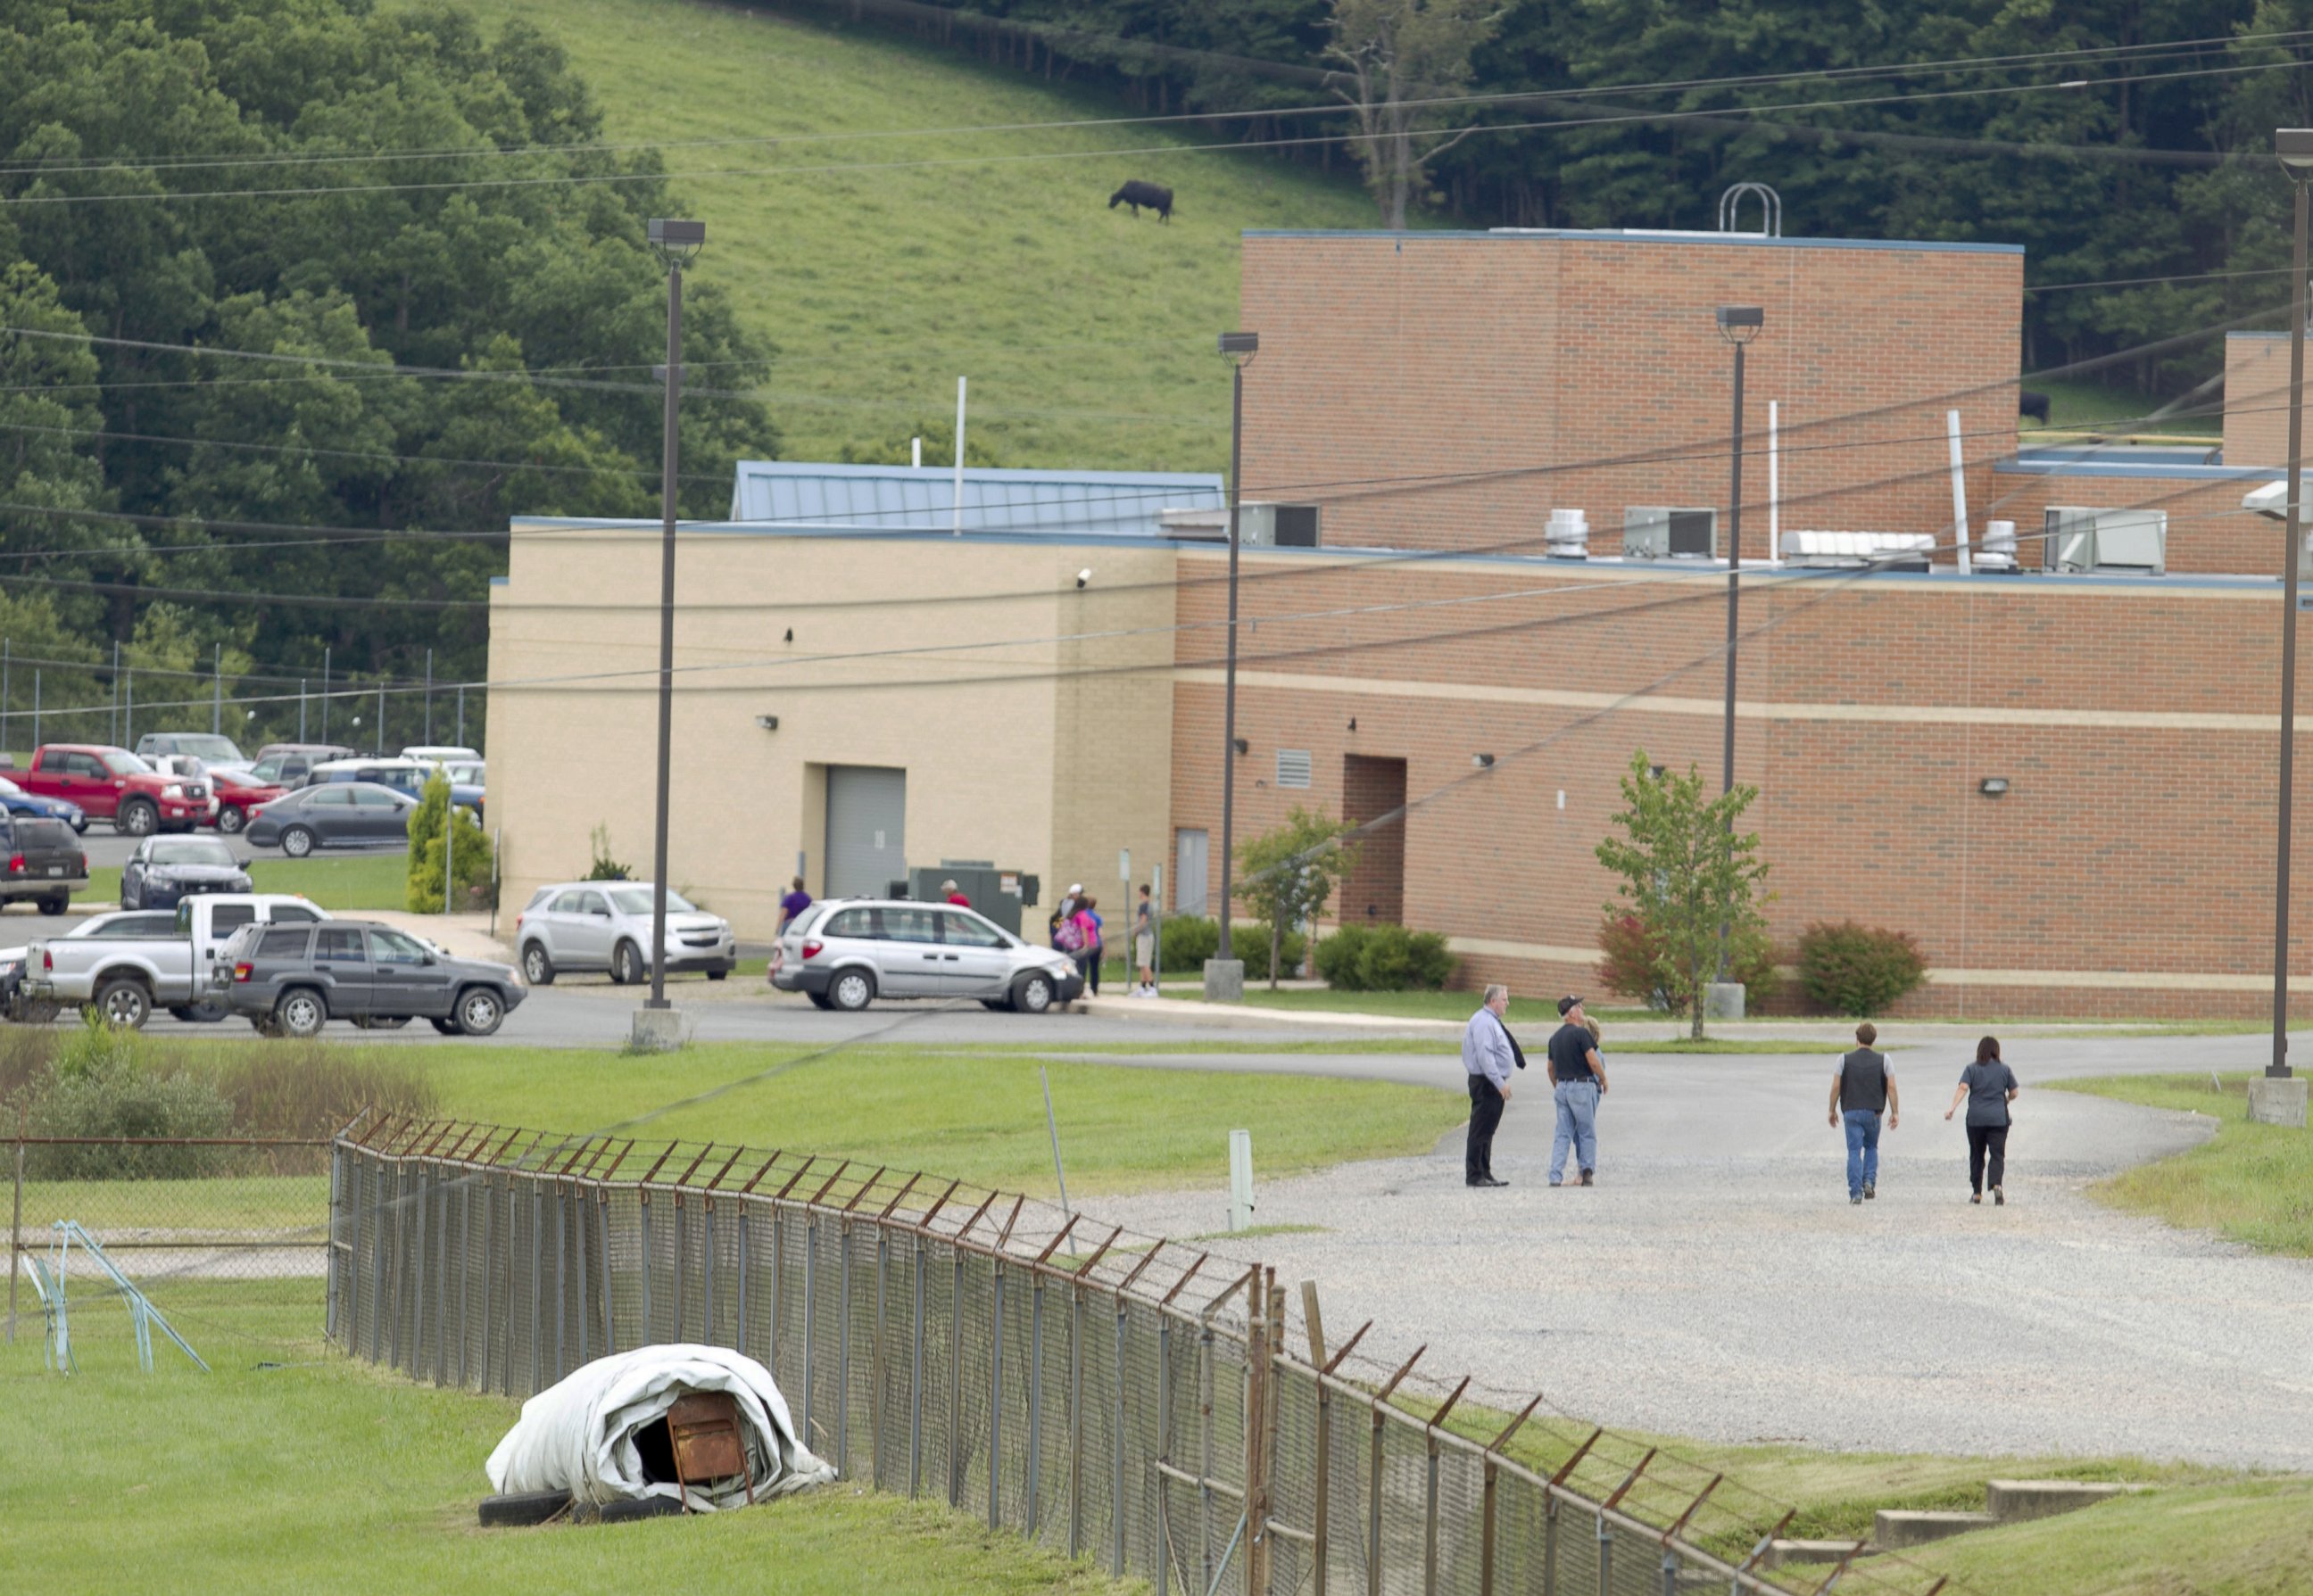 PHOTO: Parents of children from Philip Barbour High School in Philippi, W.Va.,walk to the school to meet up with their children that were evacuated after a hostage situation occurred in the cafeteria of the school, Aug. 25, 2015. 